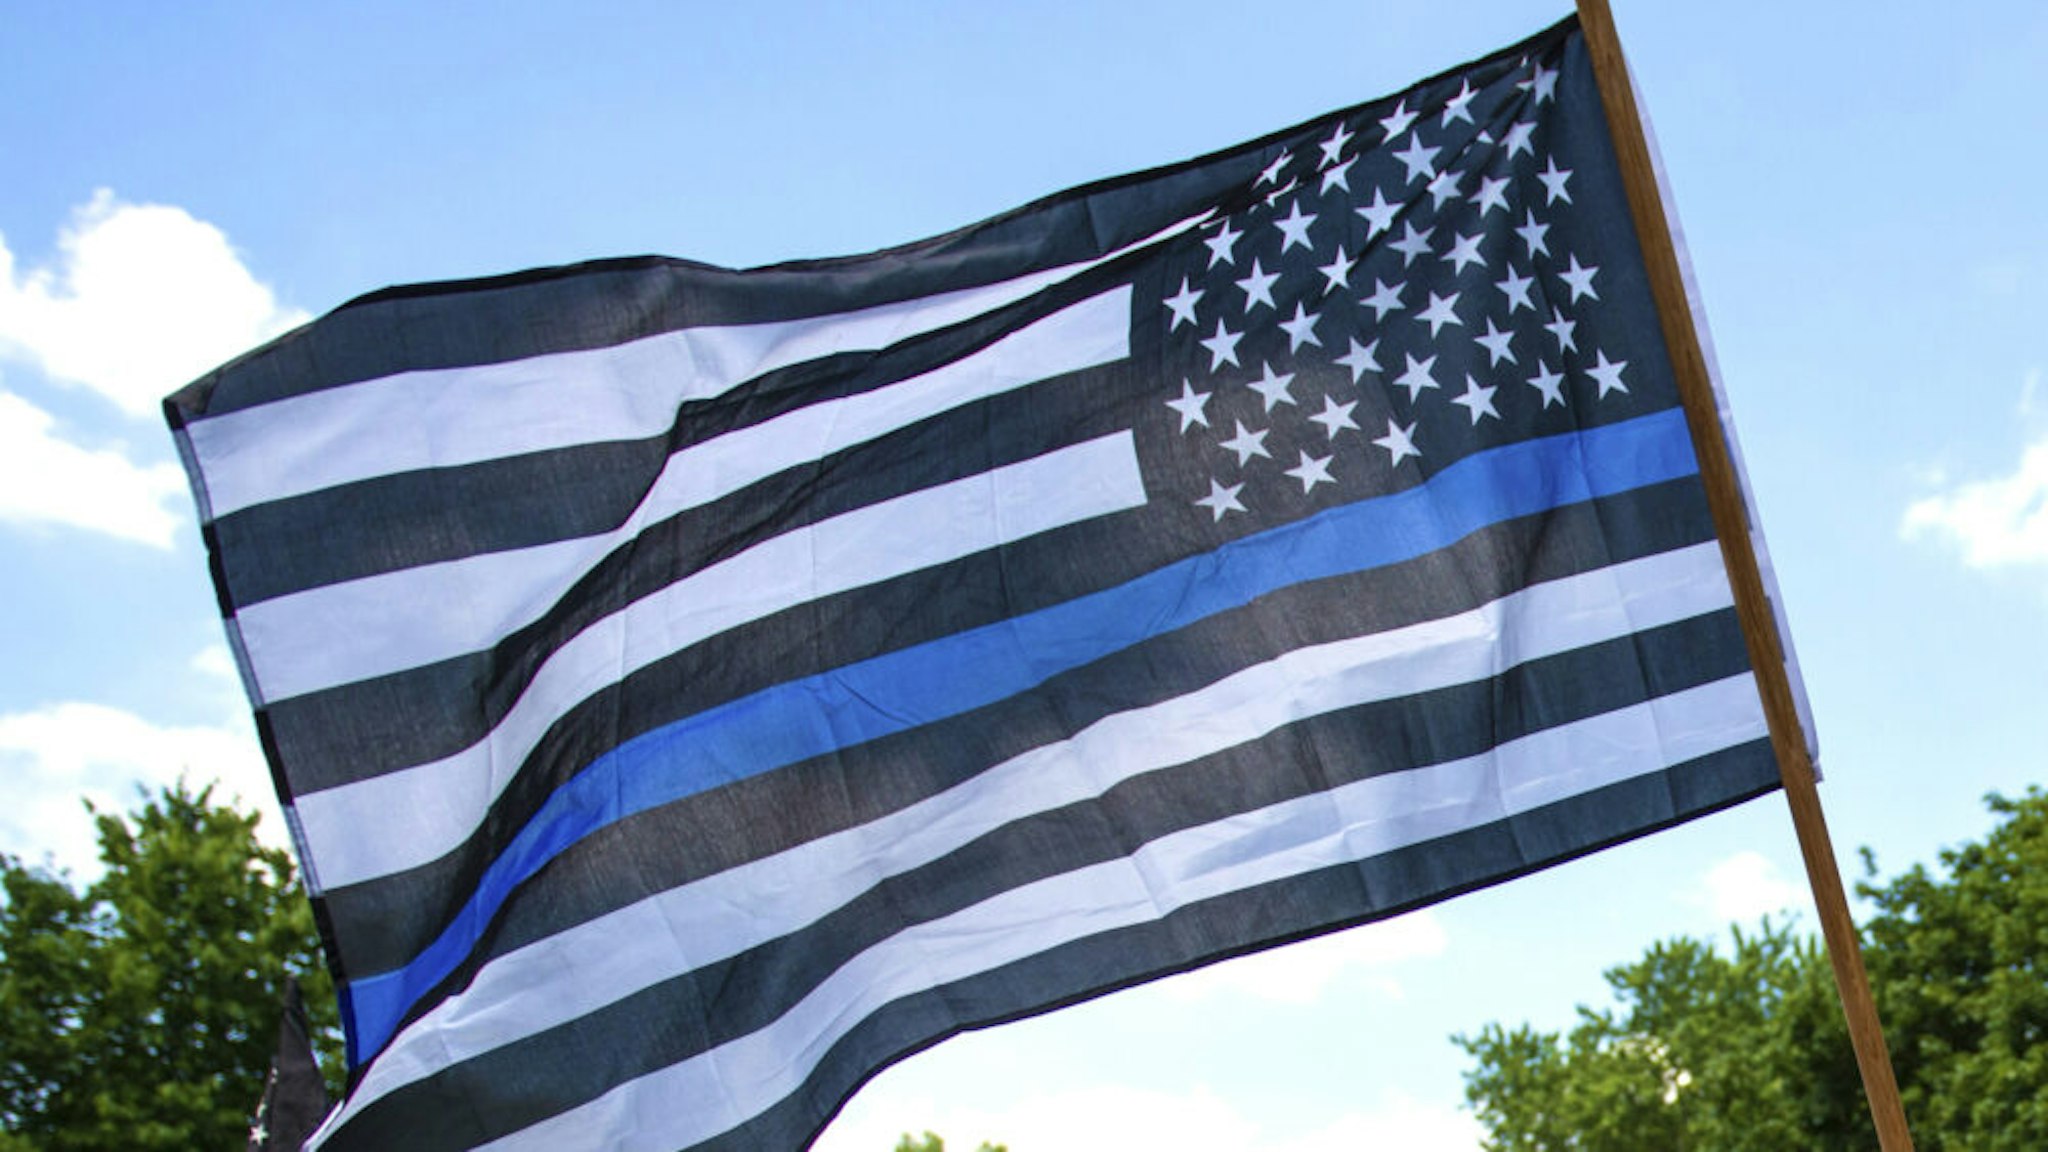 A demonstrator holds a "Thin Blue Line" flag and a sign in support of police during a protest outside the Governors Mansion on June 27, 2020 in St Paul, Minnesota. A group called "Bikers for 45" advocating a pro-police stance arranged the protest and were met with counter-protesters calling for measures to defund police.